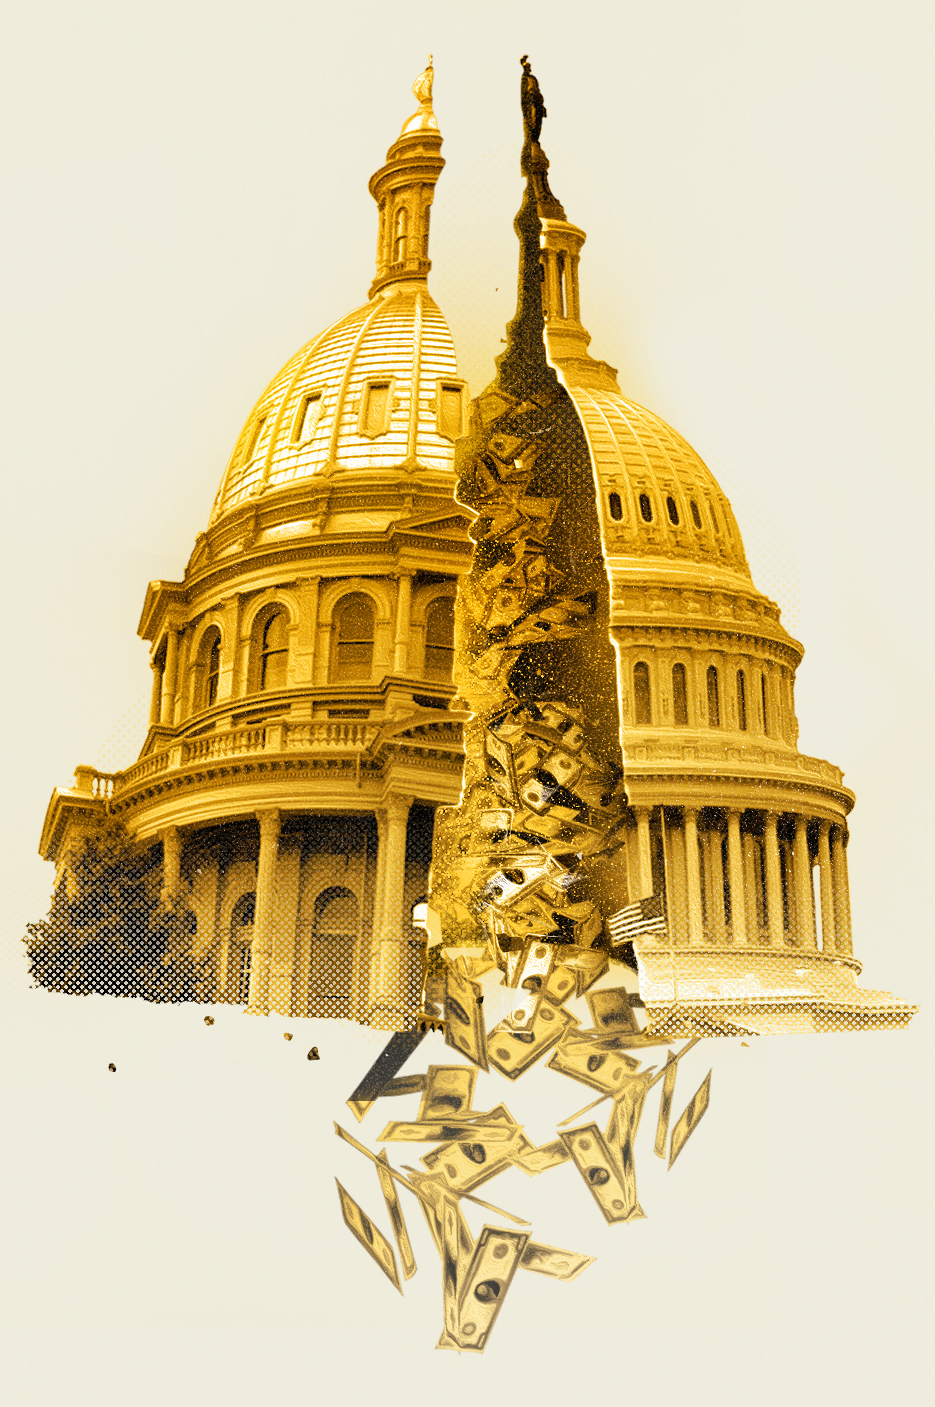 A conceptual image of a crumbling government building with federal funding flowing out, implying financial decay or loss.